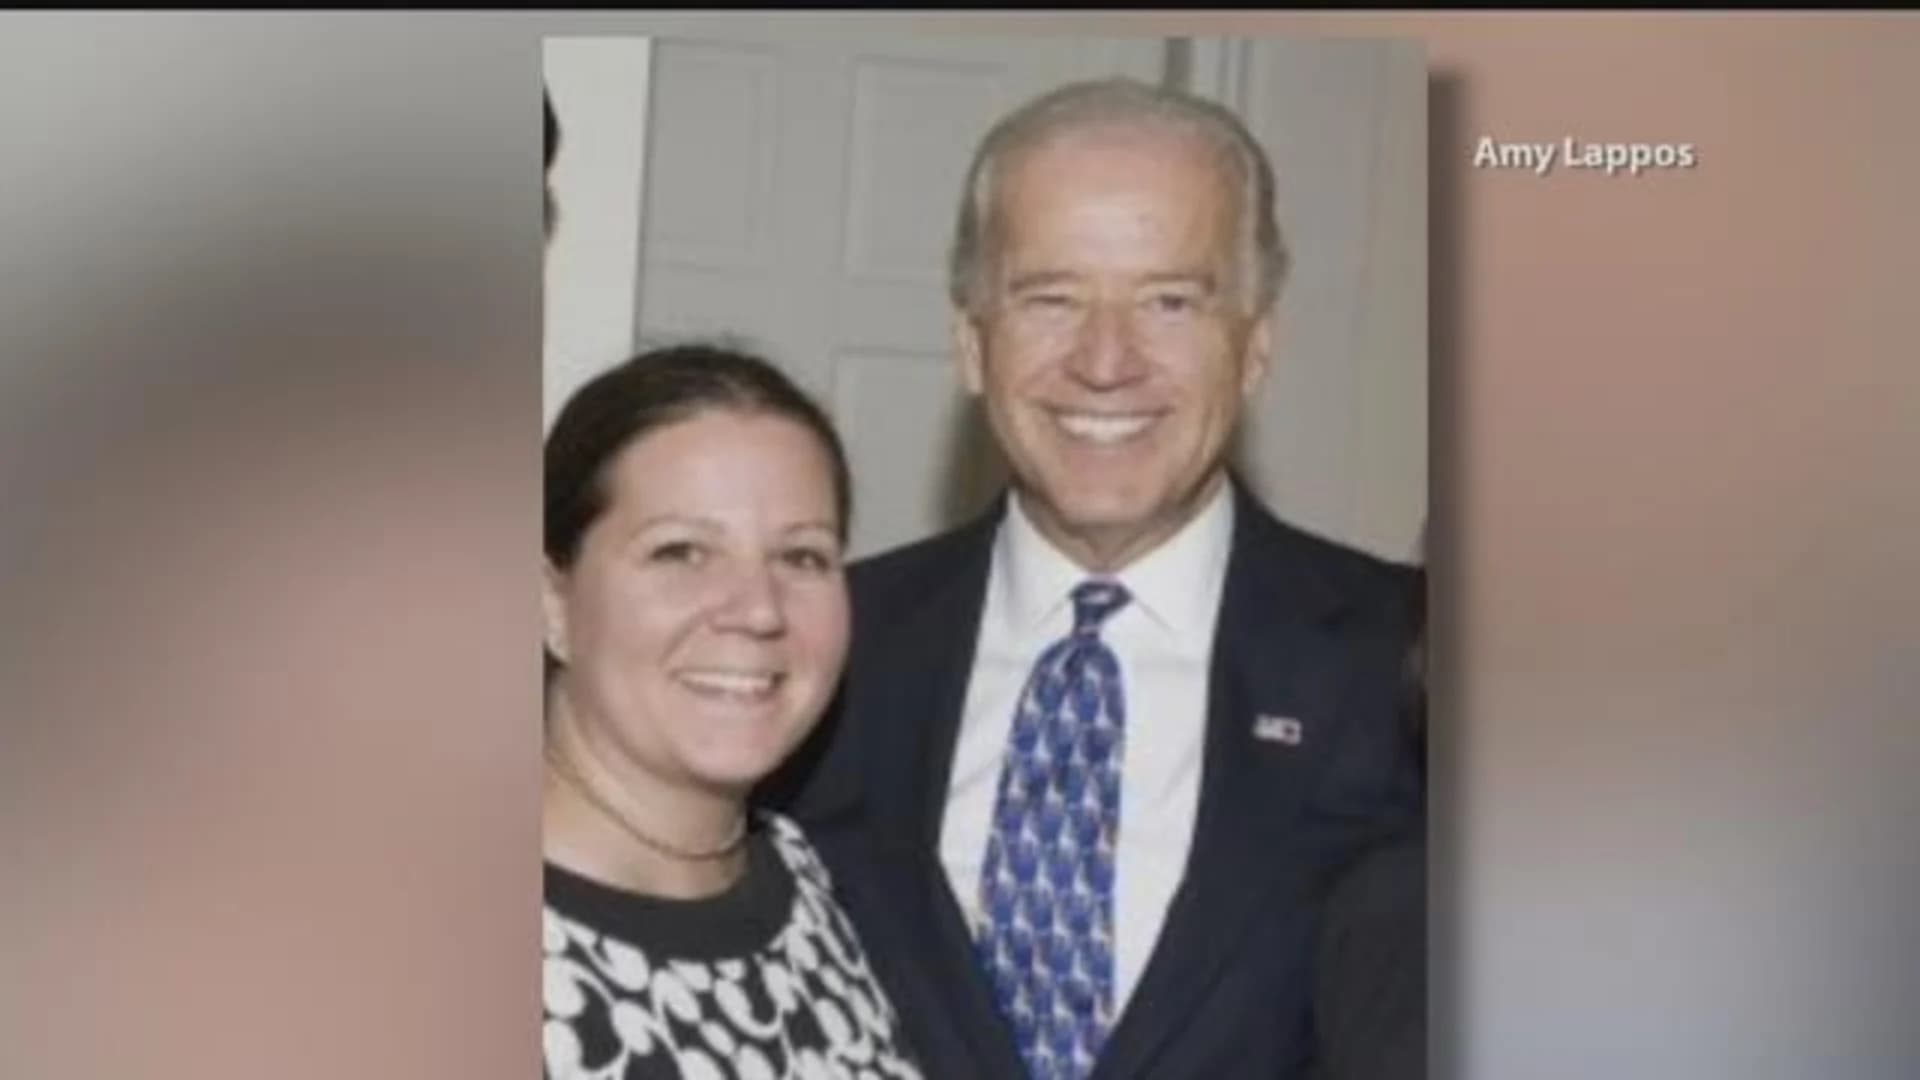 Milford woman accuses Biden of interaction that made her feel uncomfortable